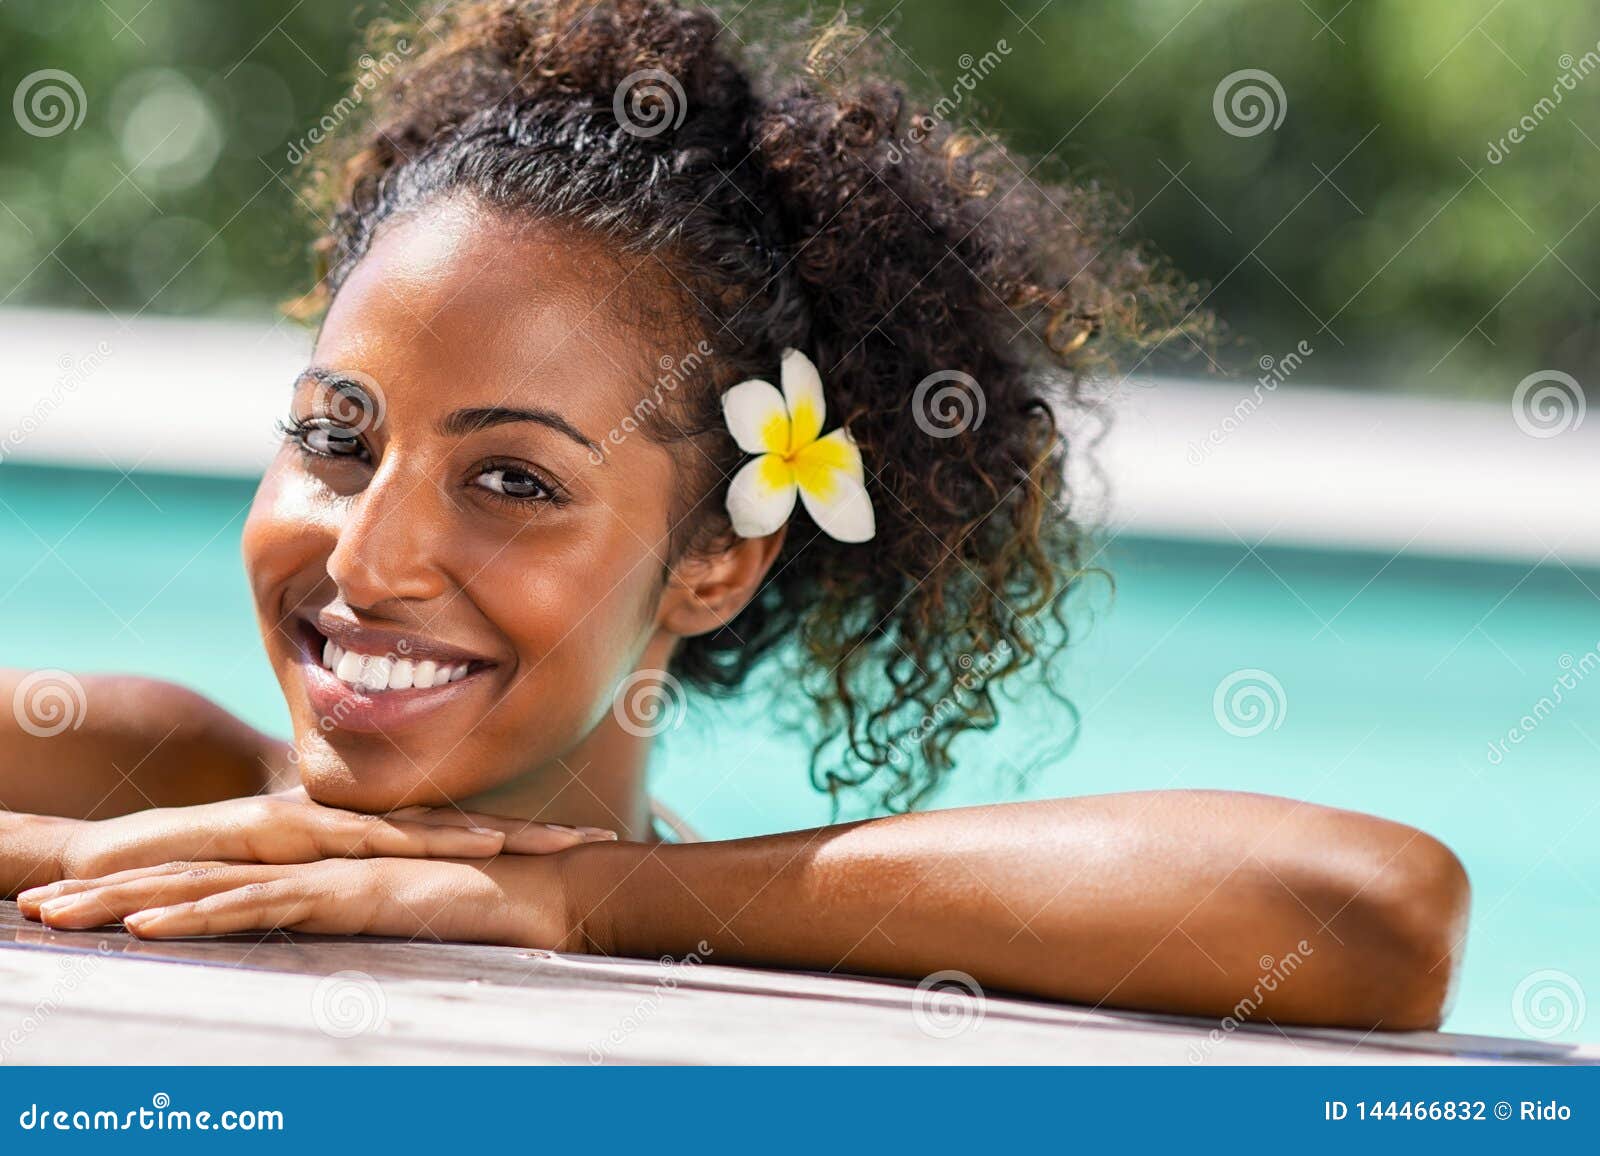 Black Girls Swimming Naked - Black Beauty Woman in Swimming Pool Smiling Stock Photo - Image of summer,  happy: 144466832